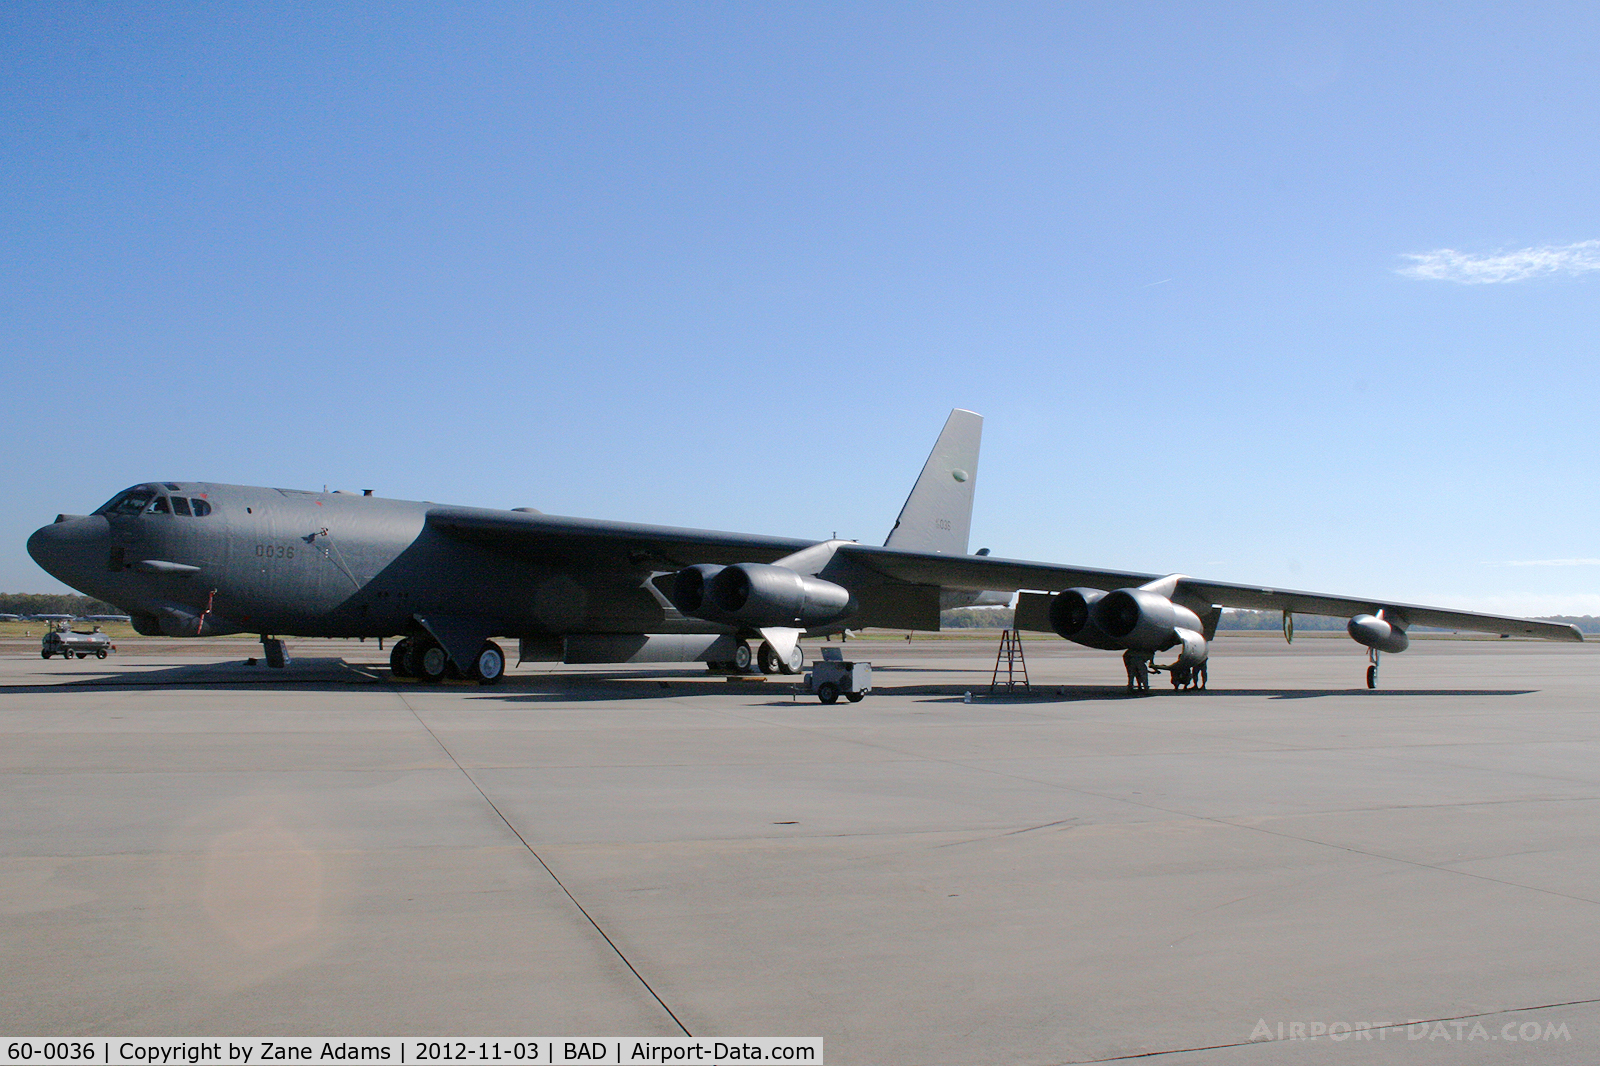 60-0036, 1960 Boeing B-52H Stratofortress C/N 464401, On the ramp at Barskdale Air Force Base